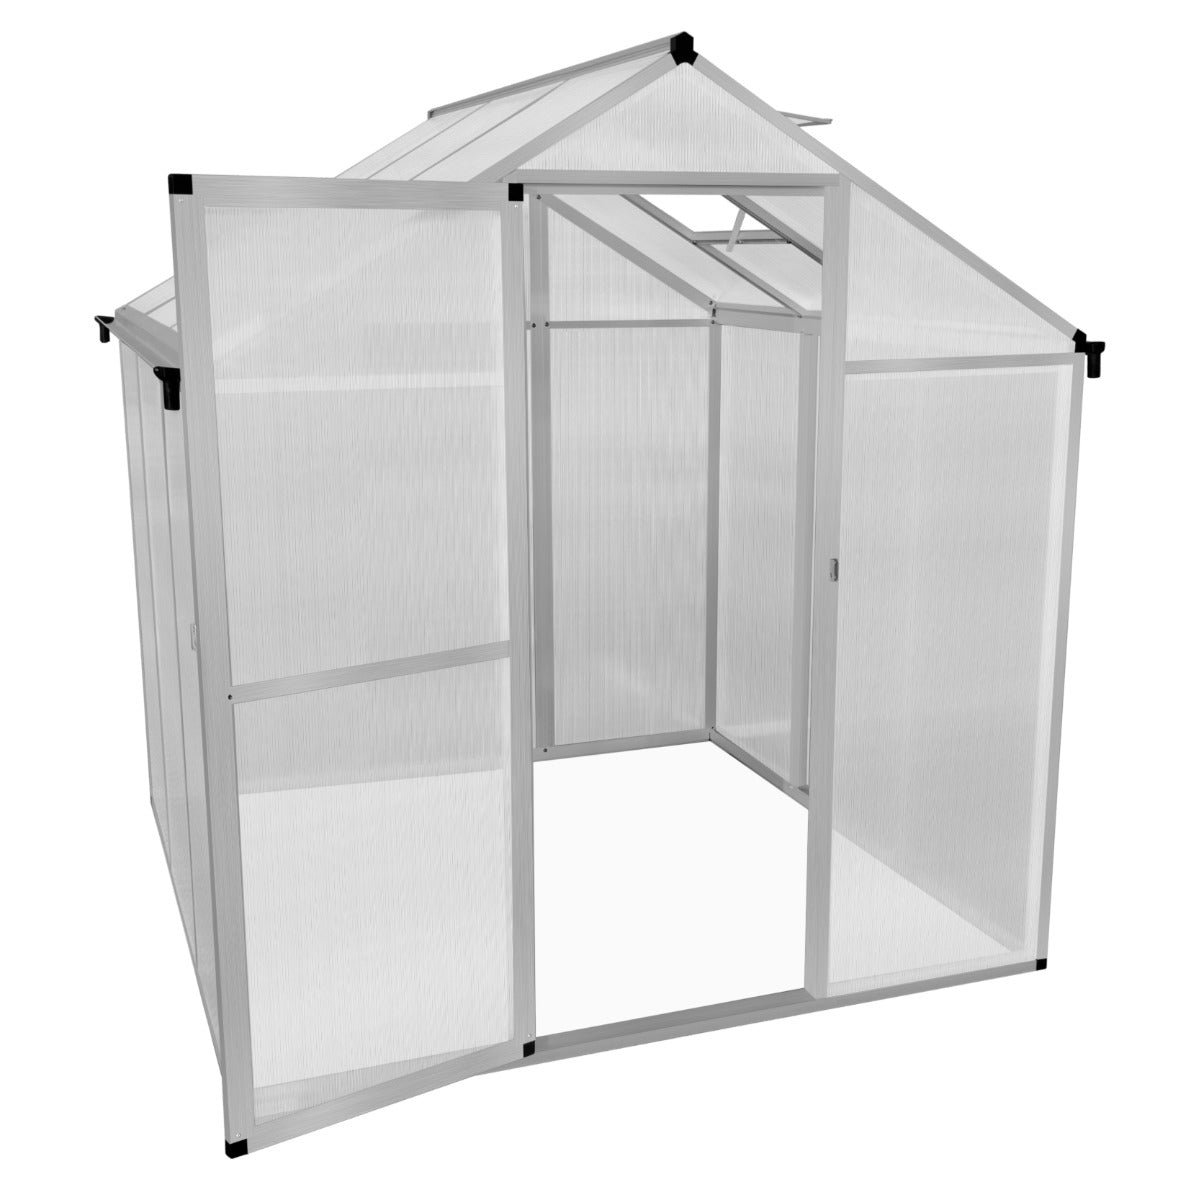 Polycarbonate Greenhouse 6ft x 6ft– Silver